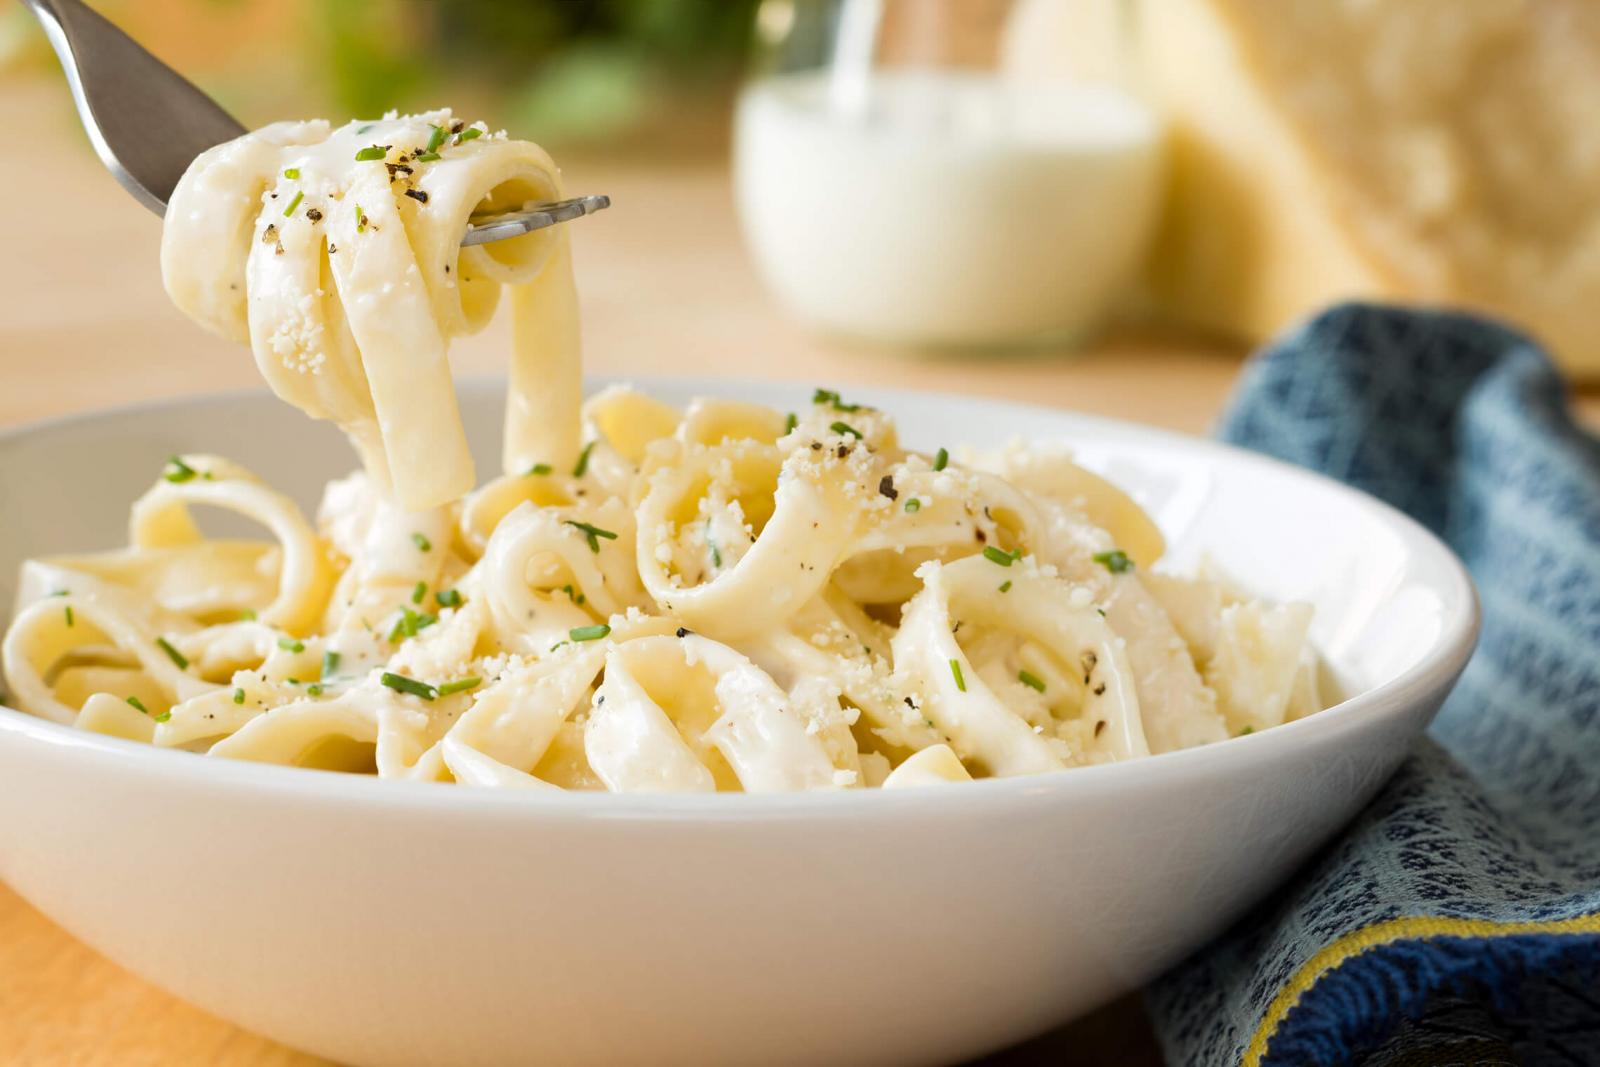 Does Your Real Age Match Your Taste Buds’ Age? Pick a Food for Each of These 16 Ingredients to Find Out Fettuccine Alfredo Pasta